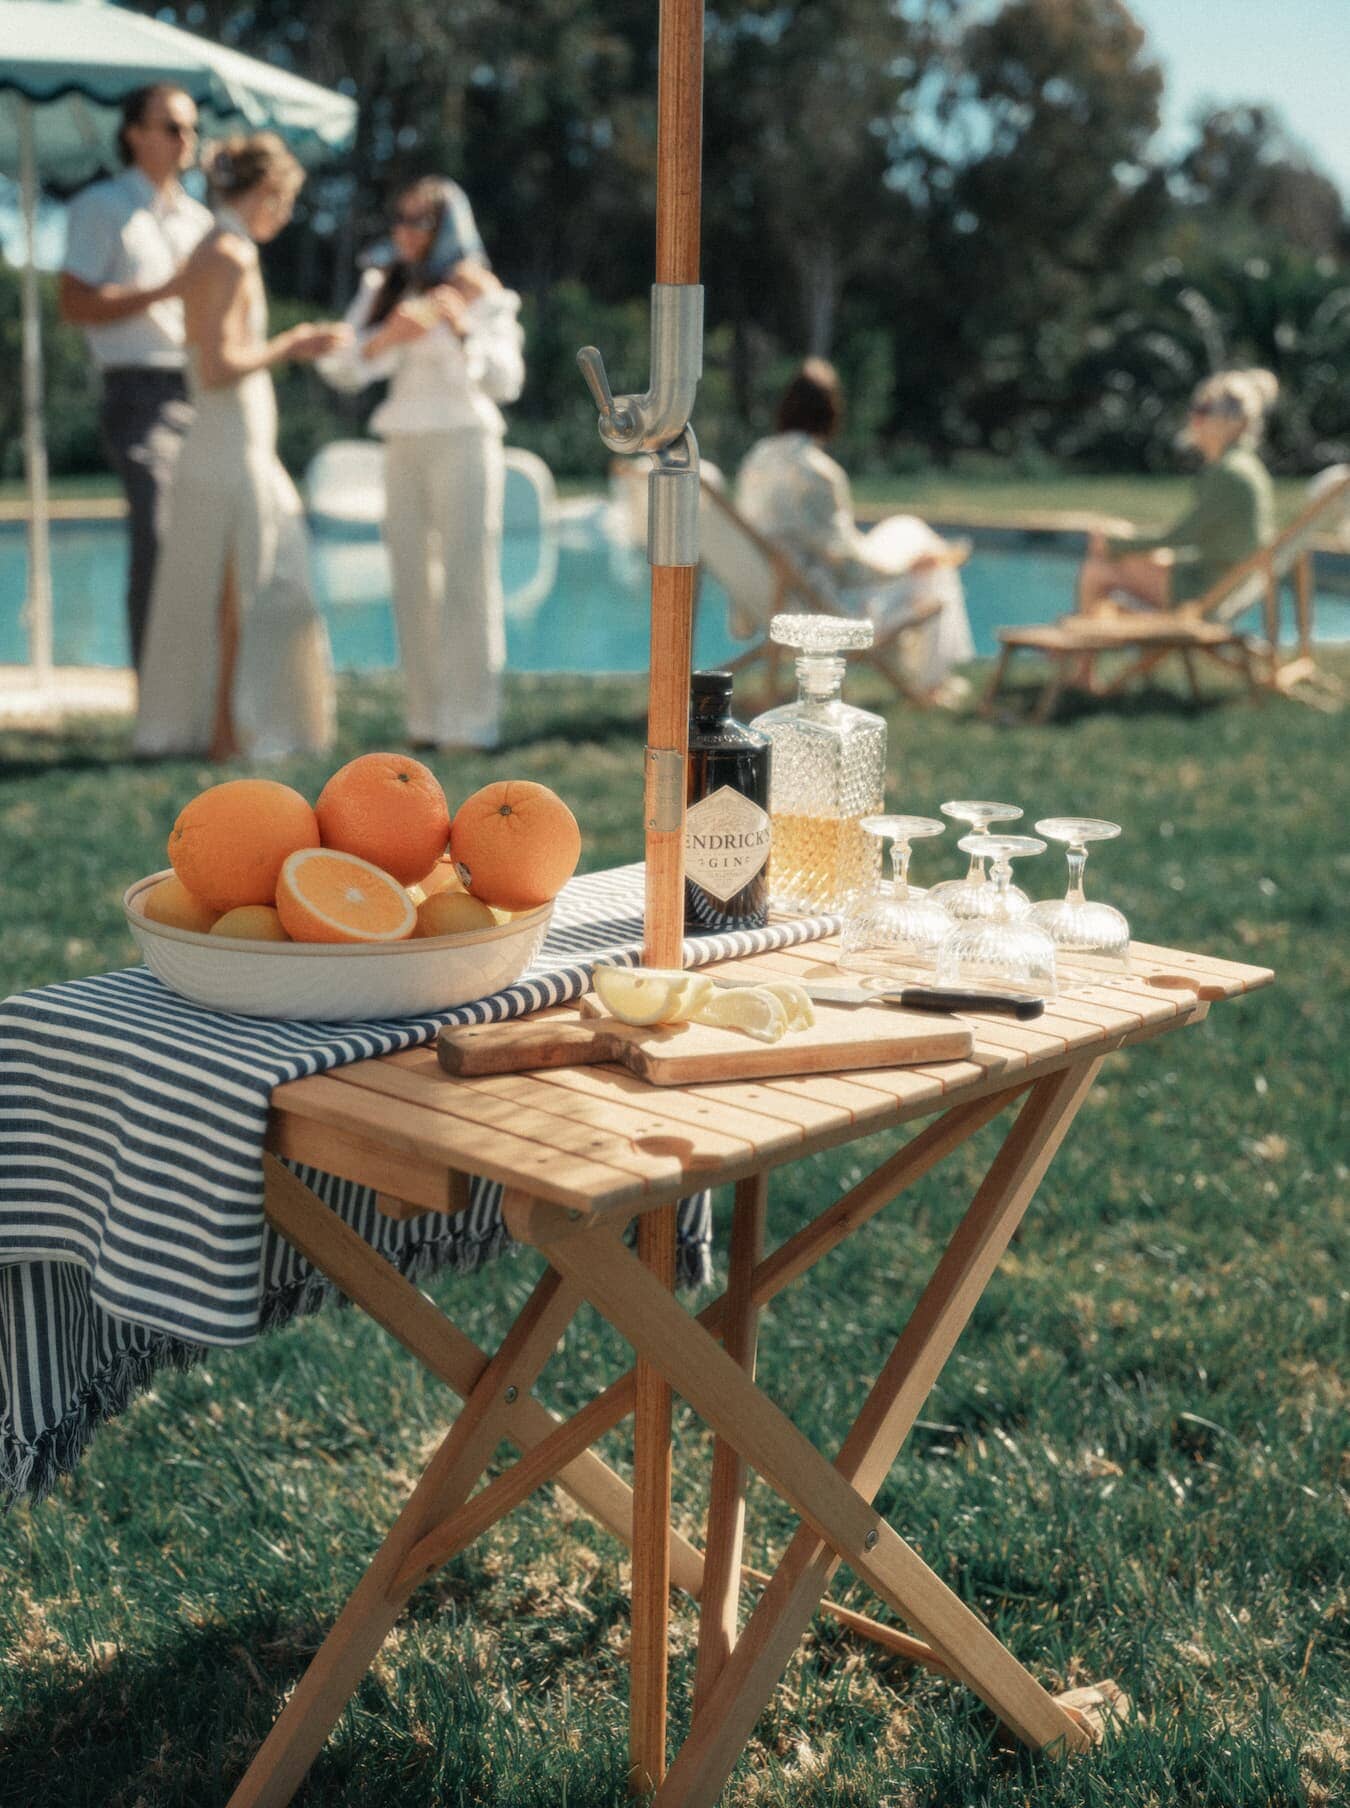 Outdoor picnic setting with tall folding table with drinks and fruit